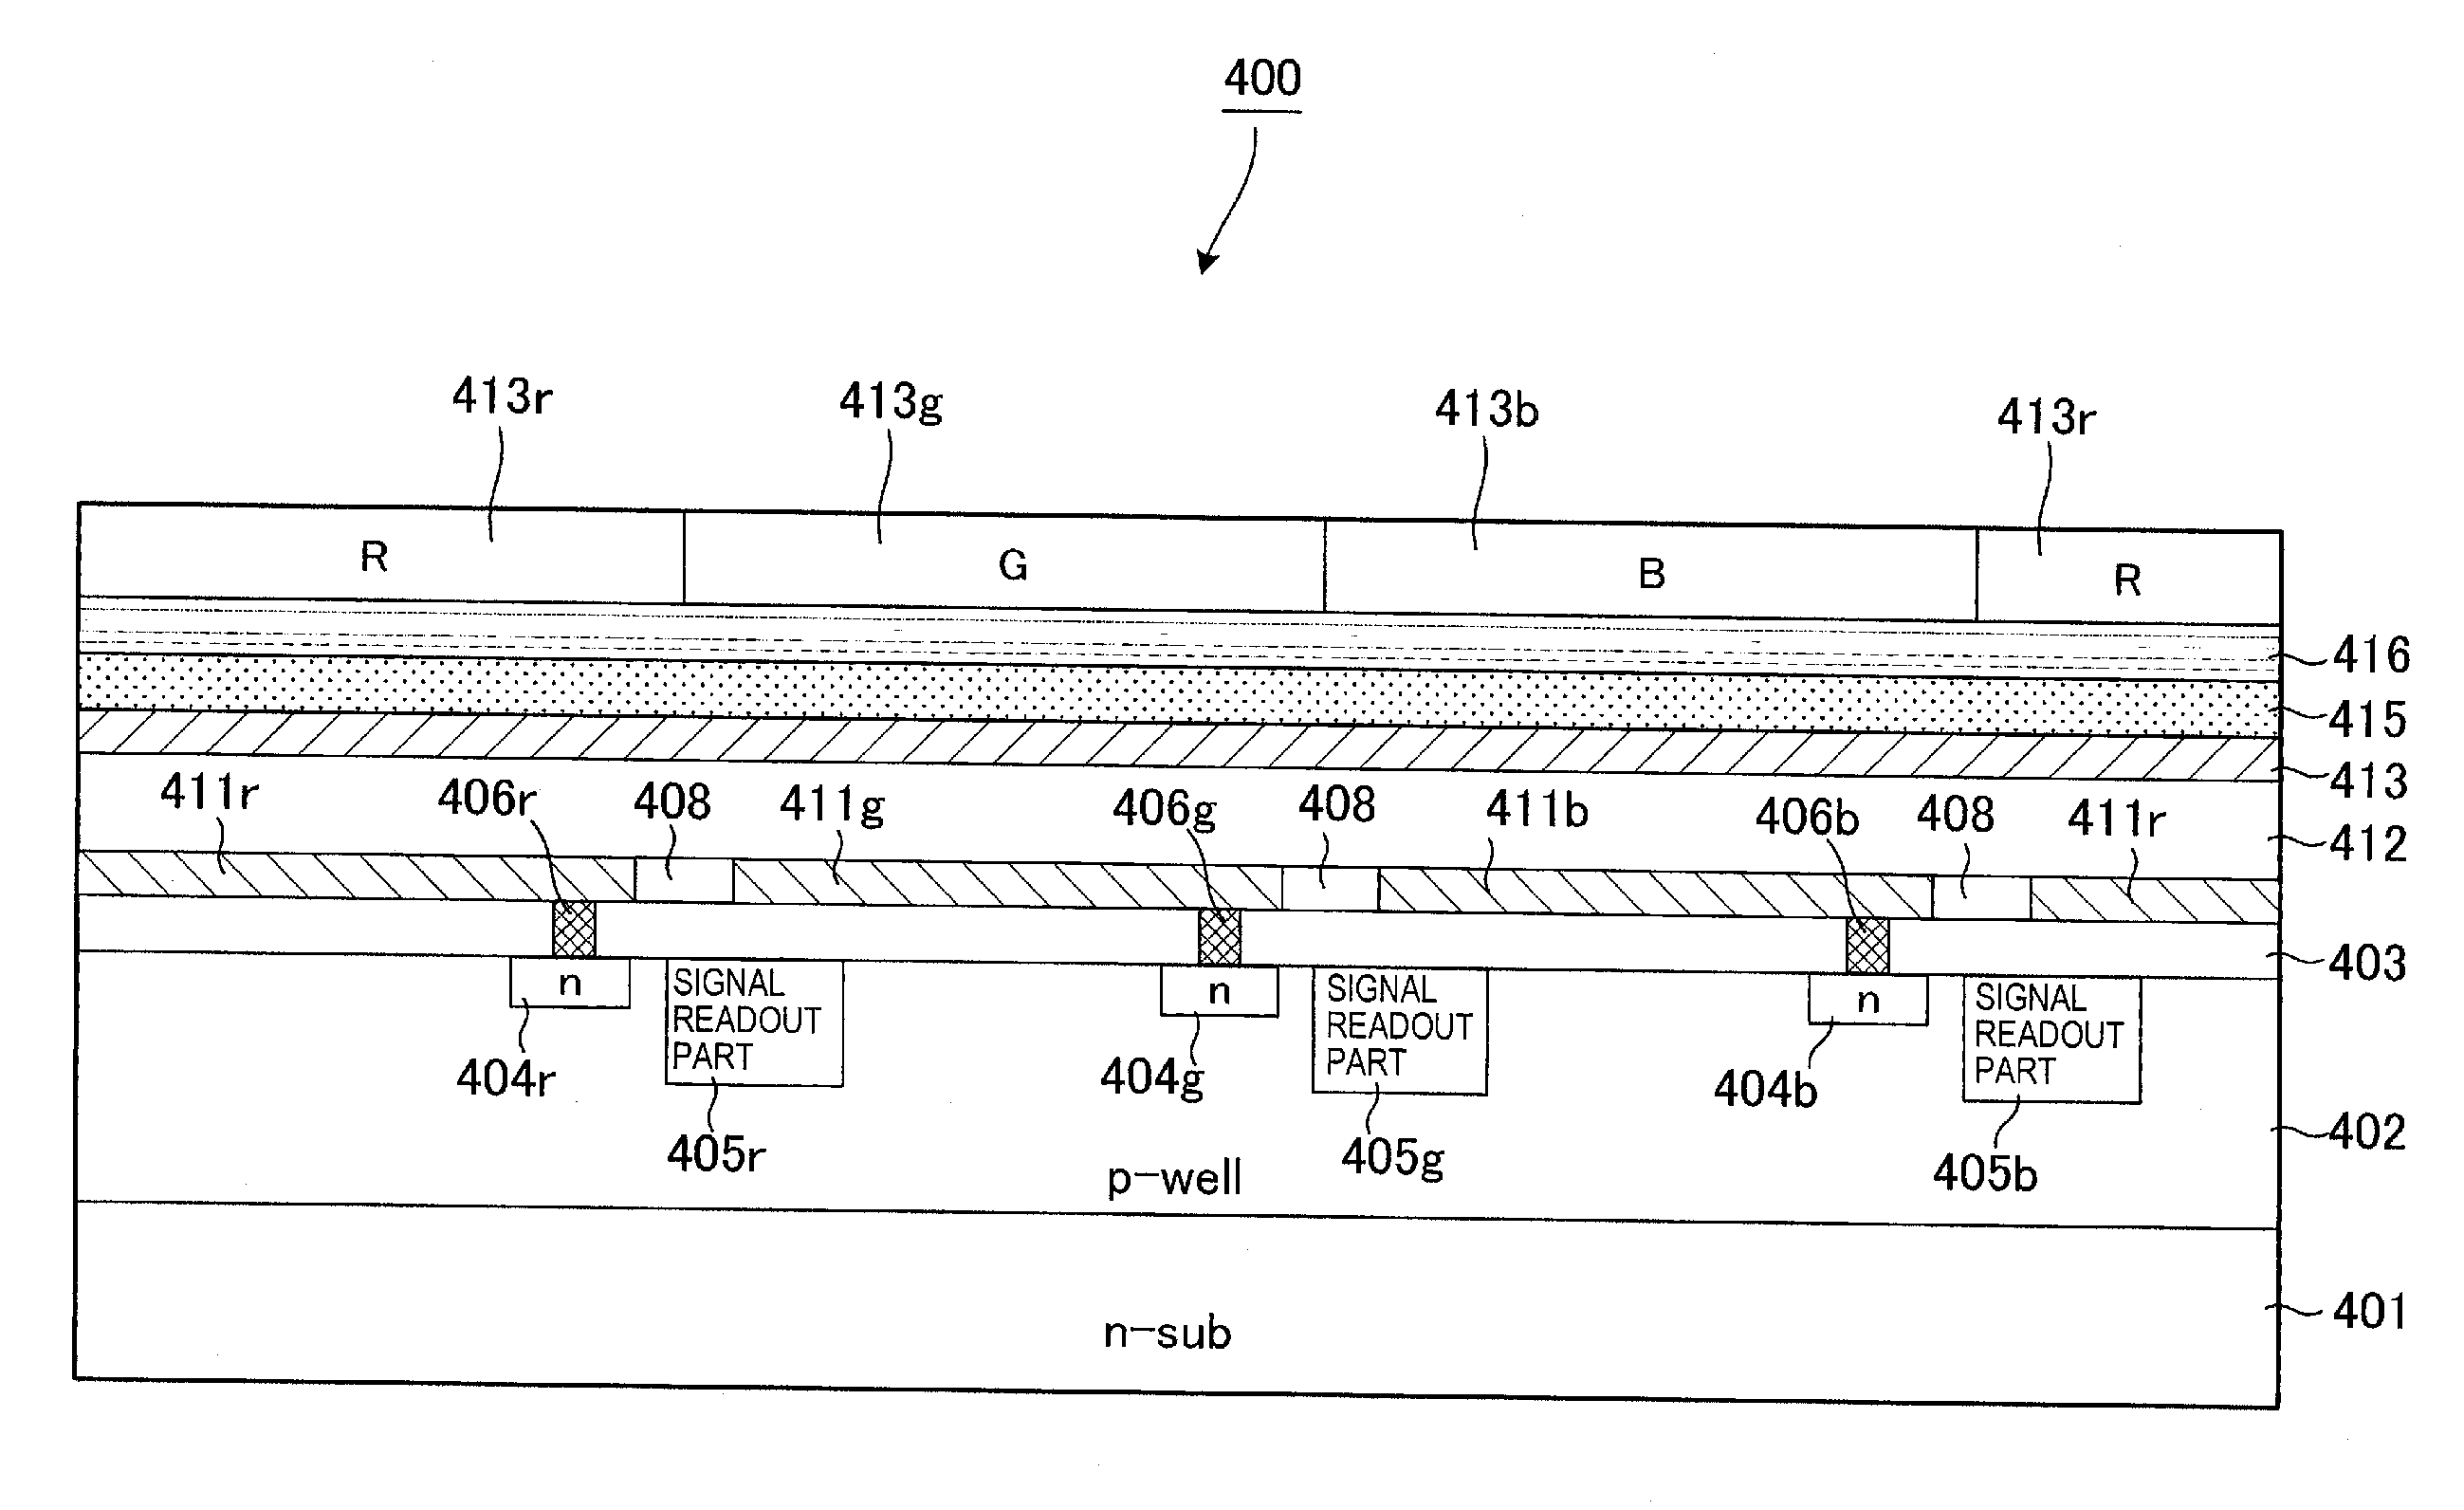 Photoelectric conversion device, imaging device and production methods thereof